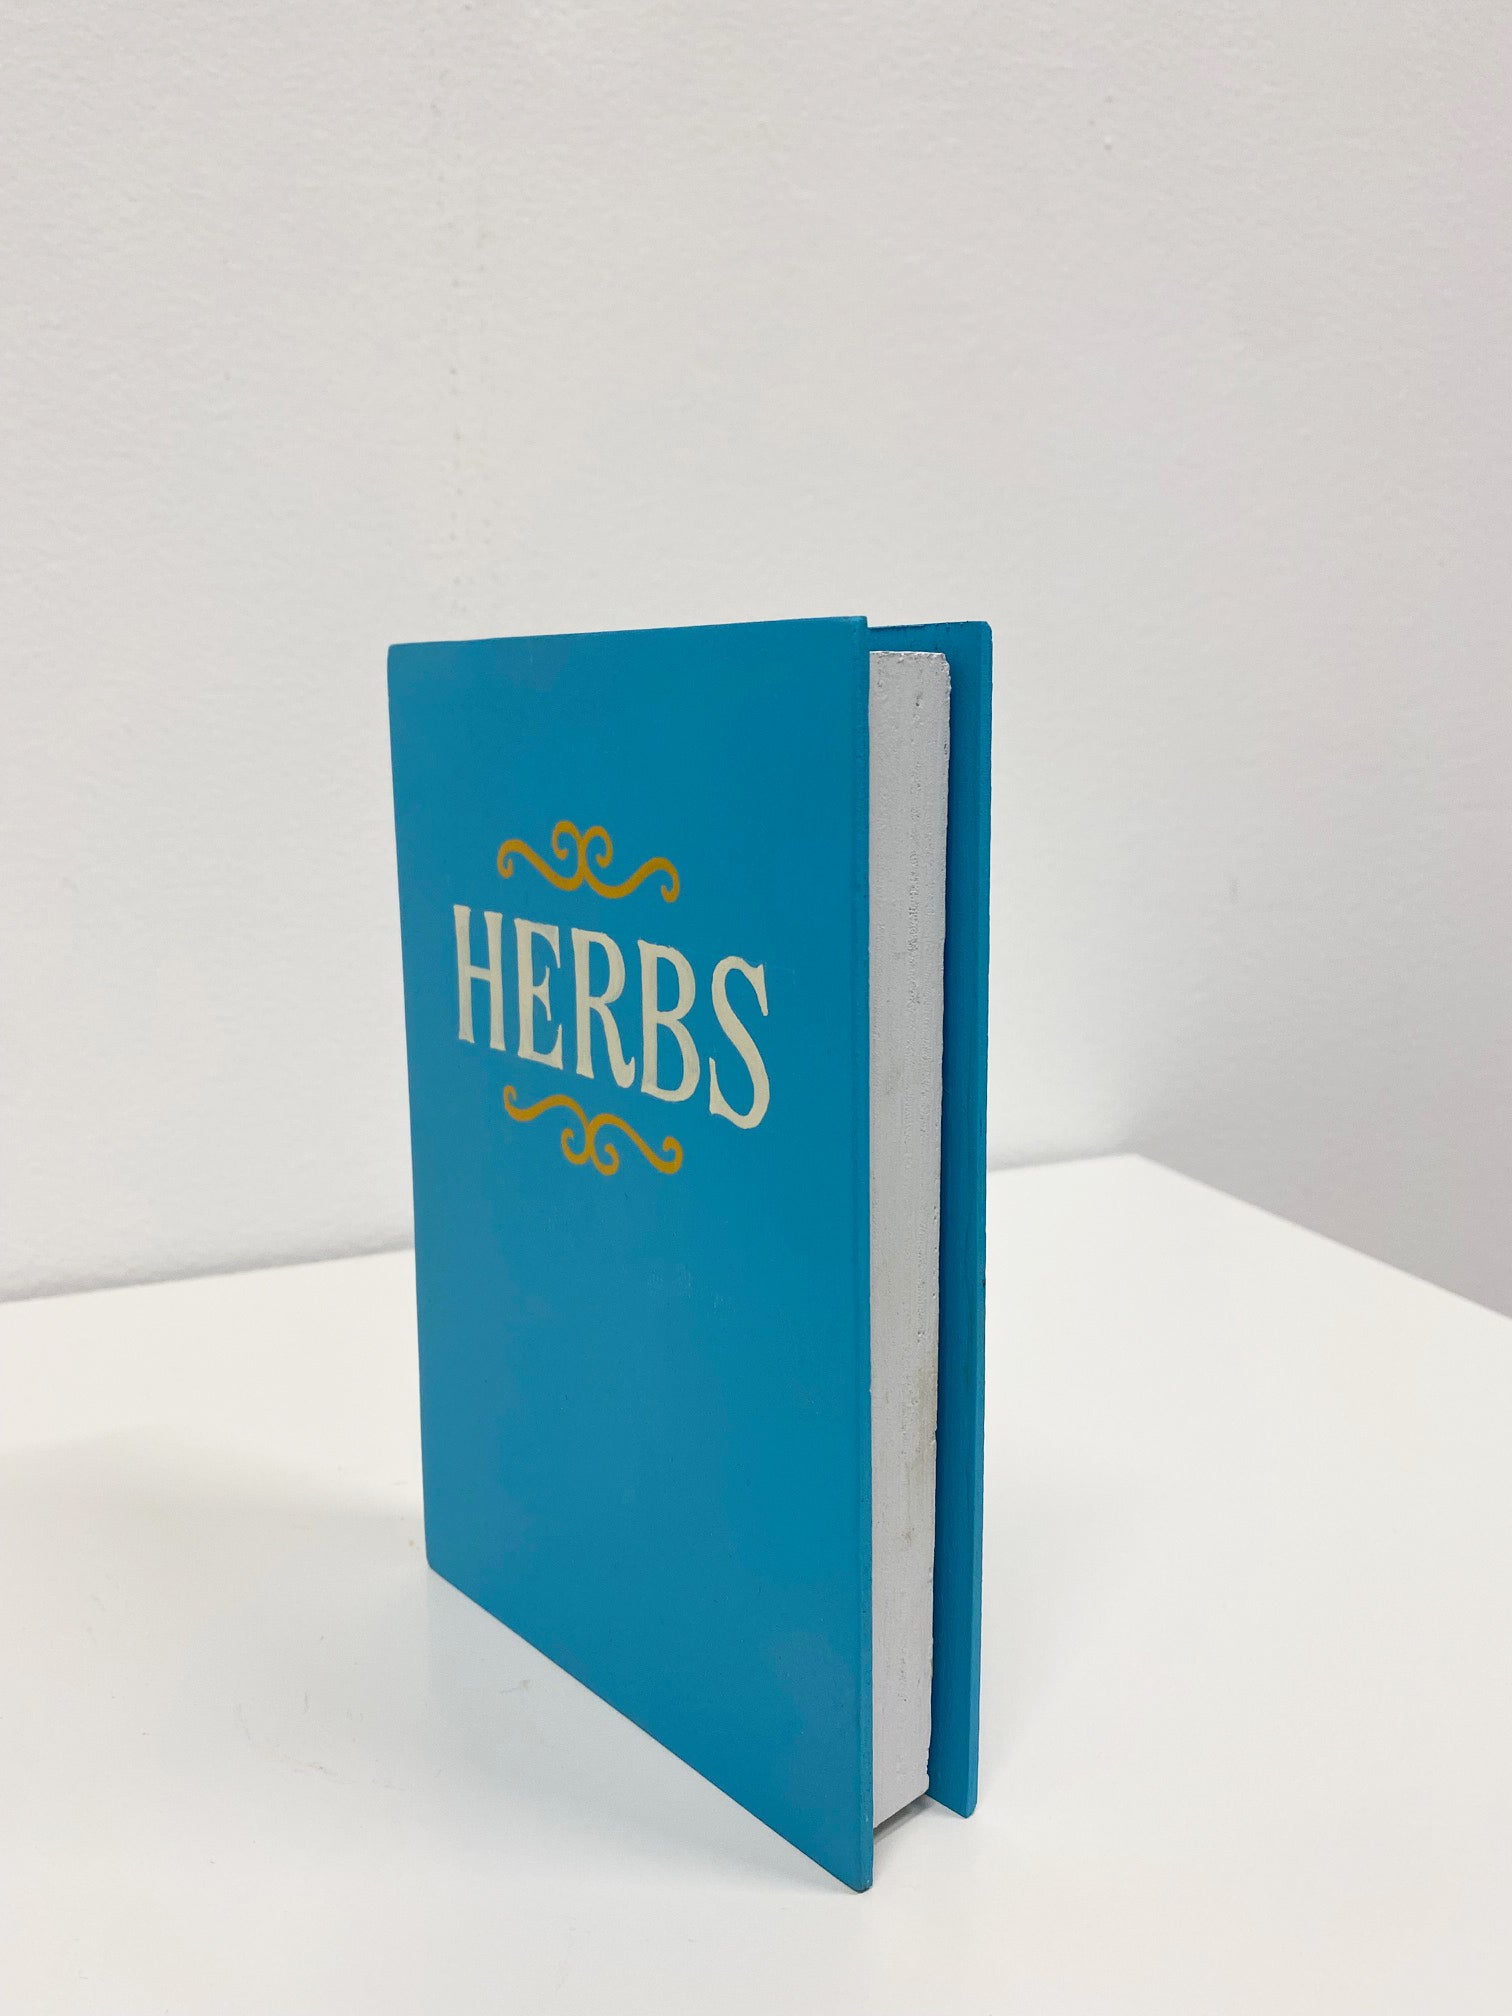 Wooden sculpture of a blue book with the word "Herbs" on the front